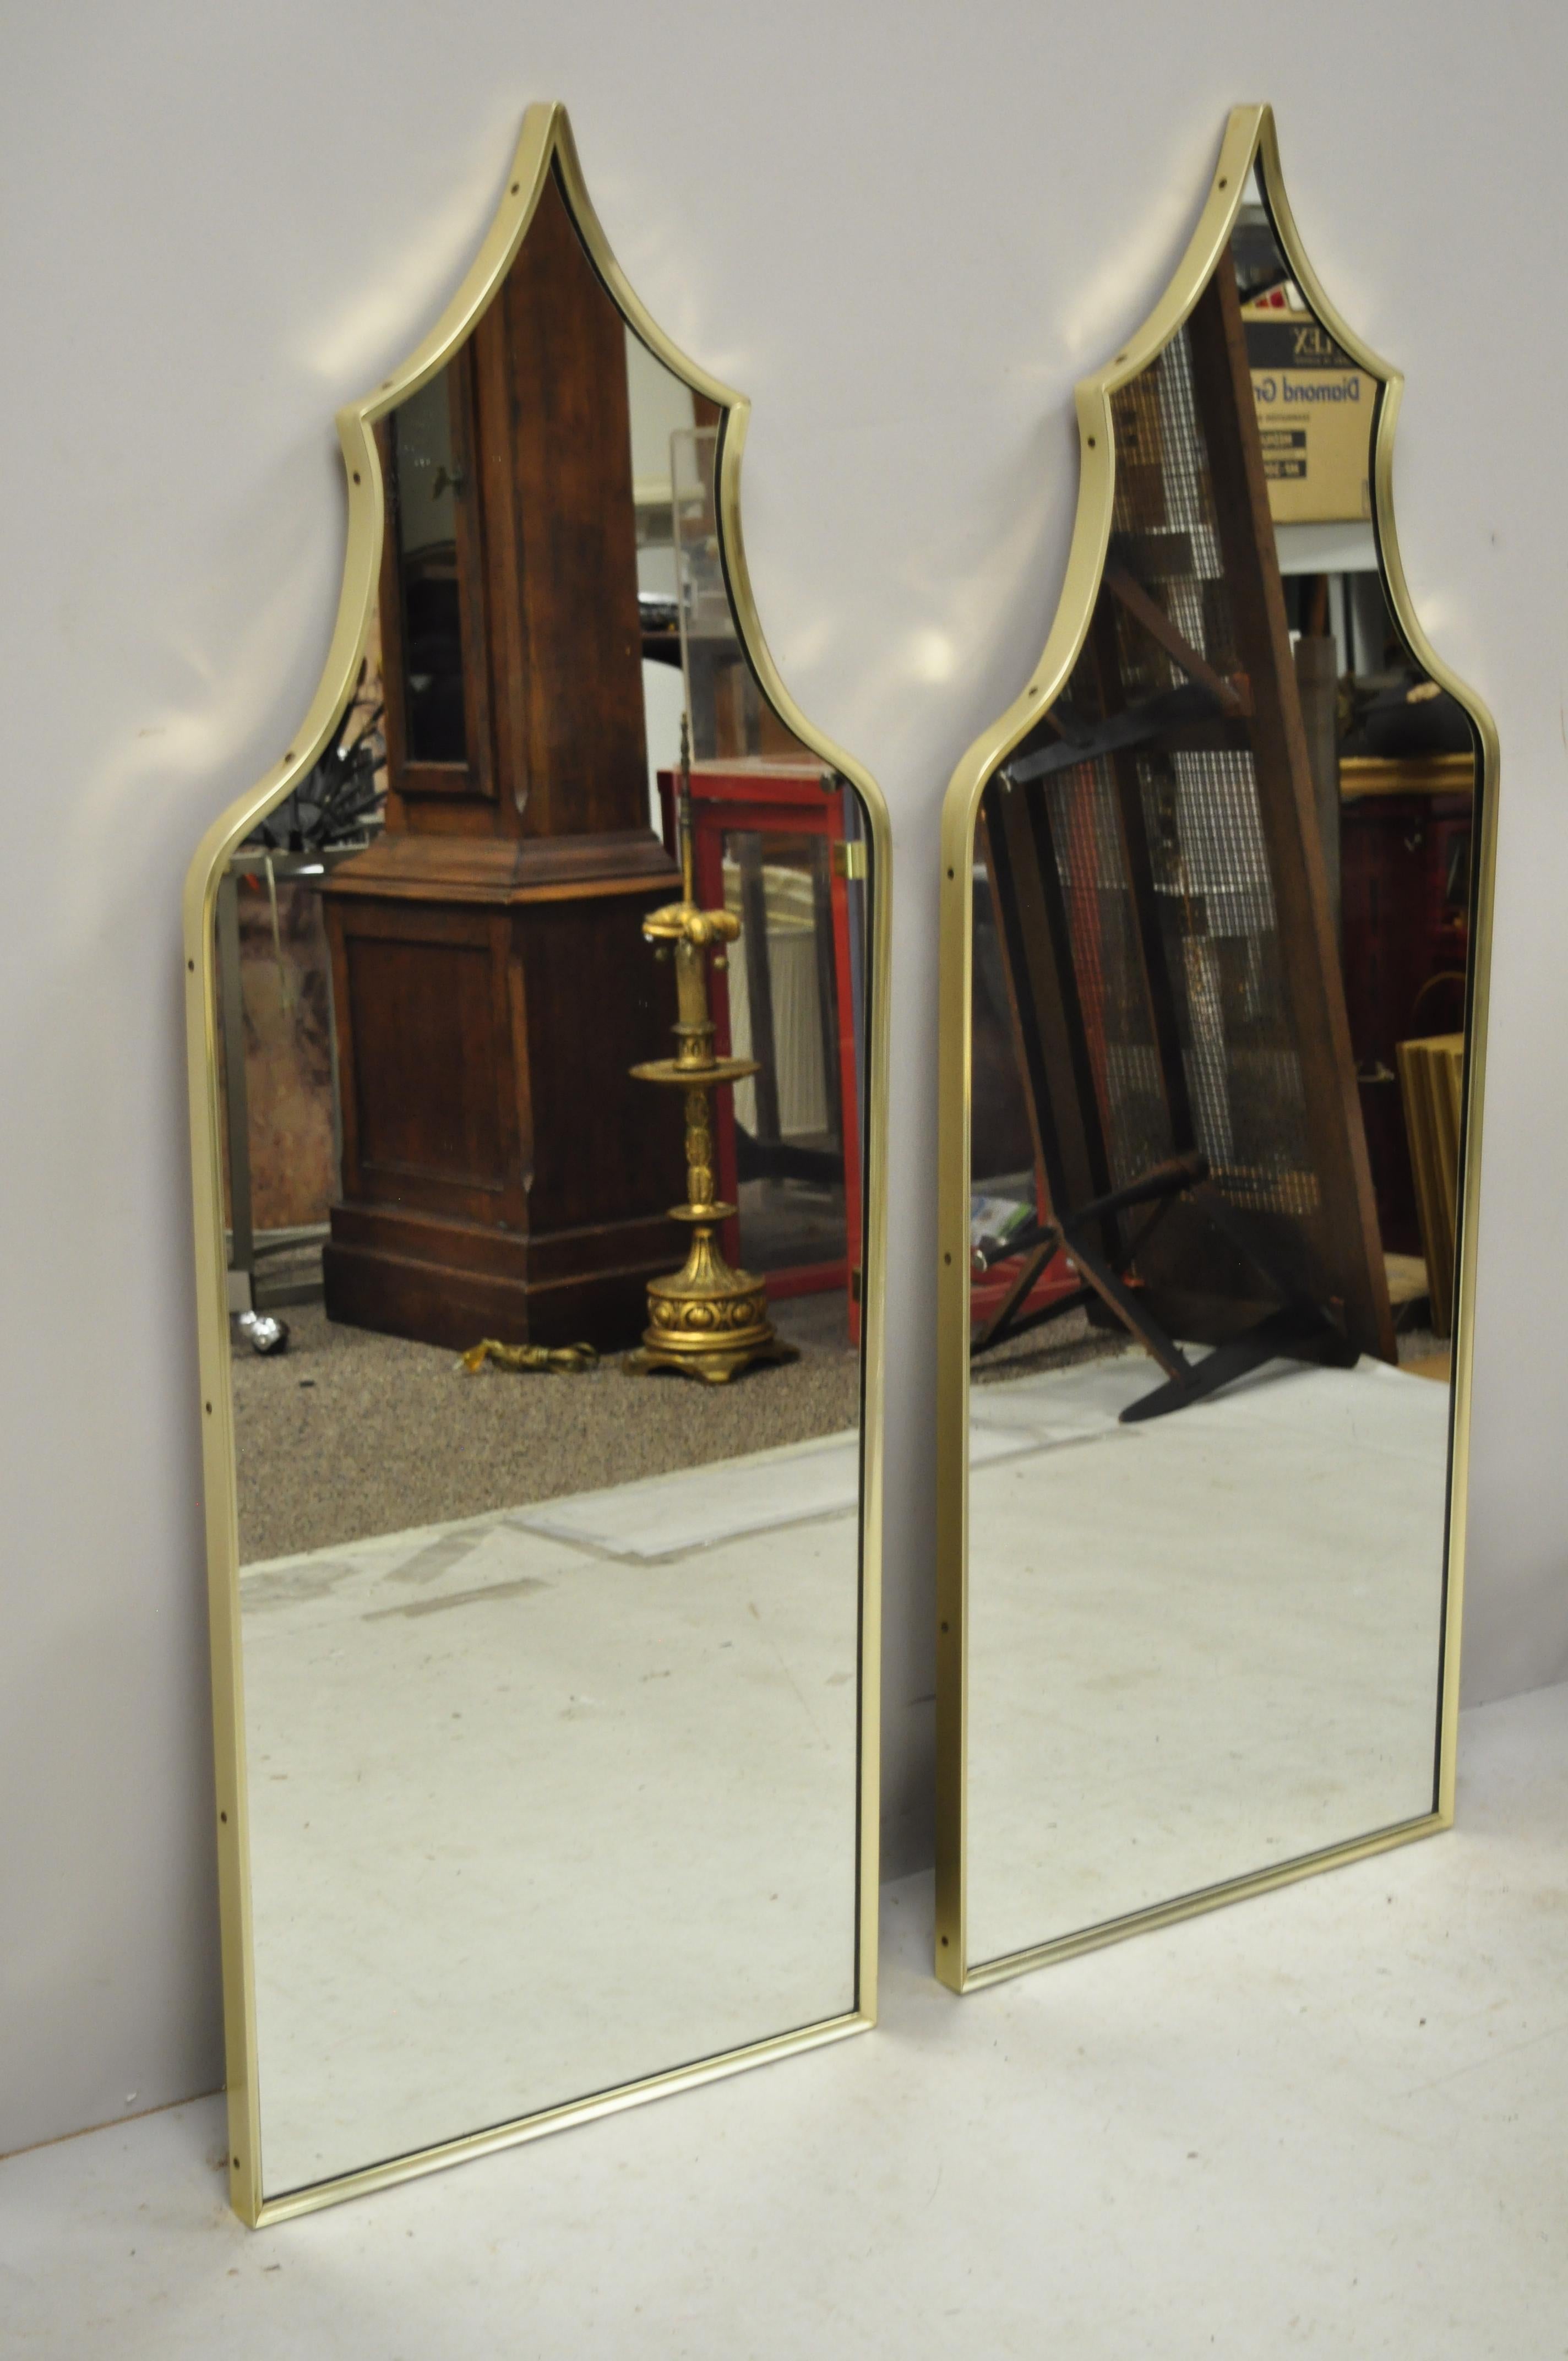 Pair of vintage brass frame arched pagoda keyhole shaped Italian wall mirrors



Details: Shapely brass frames, clean modernist lines, sleek sculptural form



Age: Mid-20th century



Measurements: 48.5